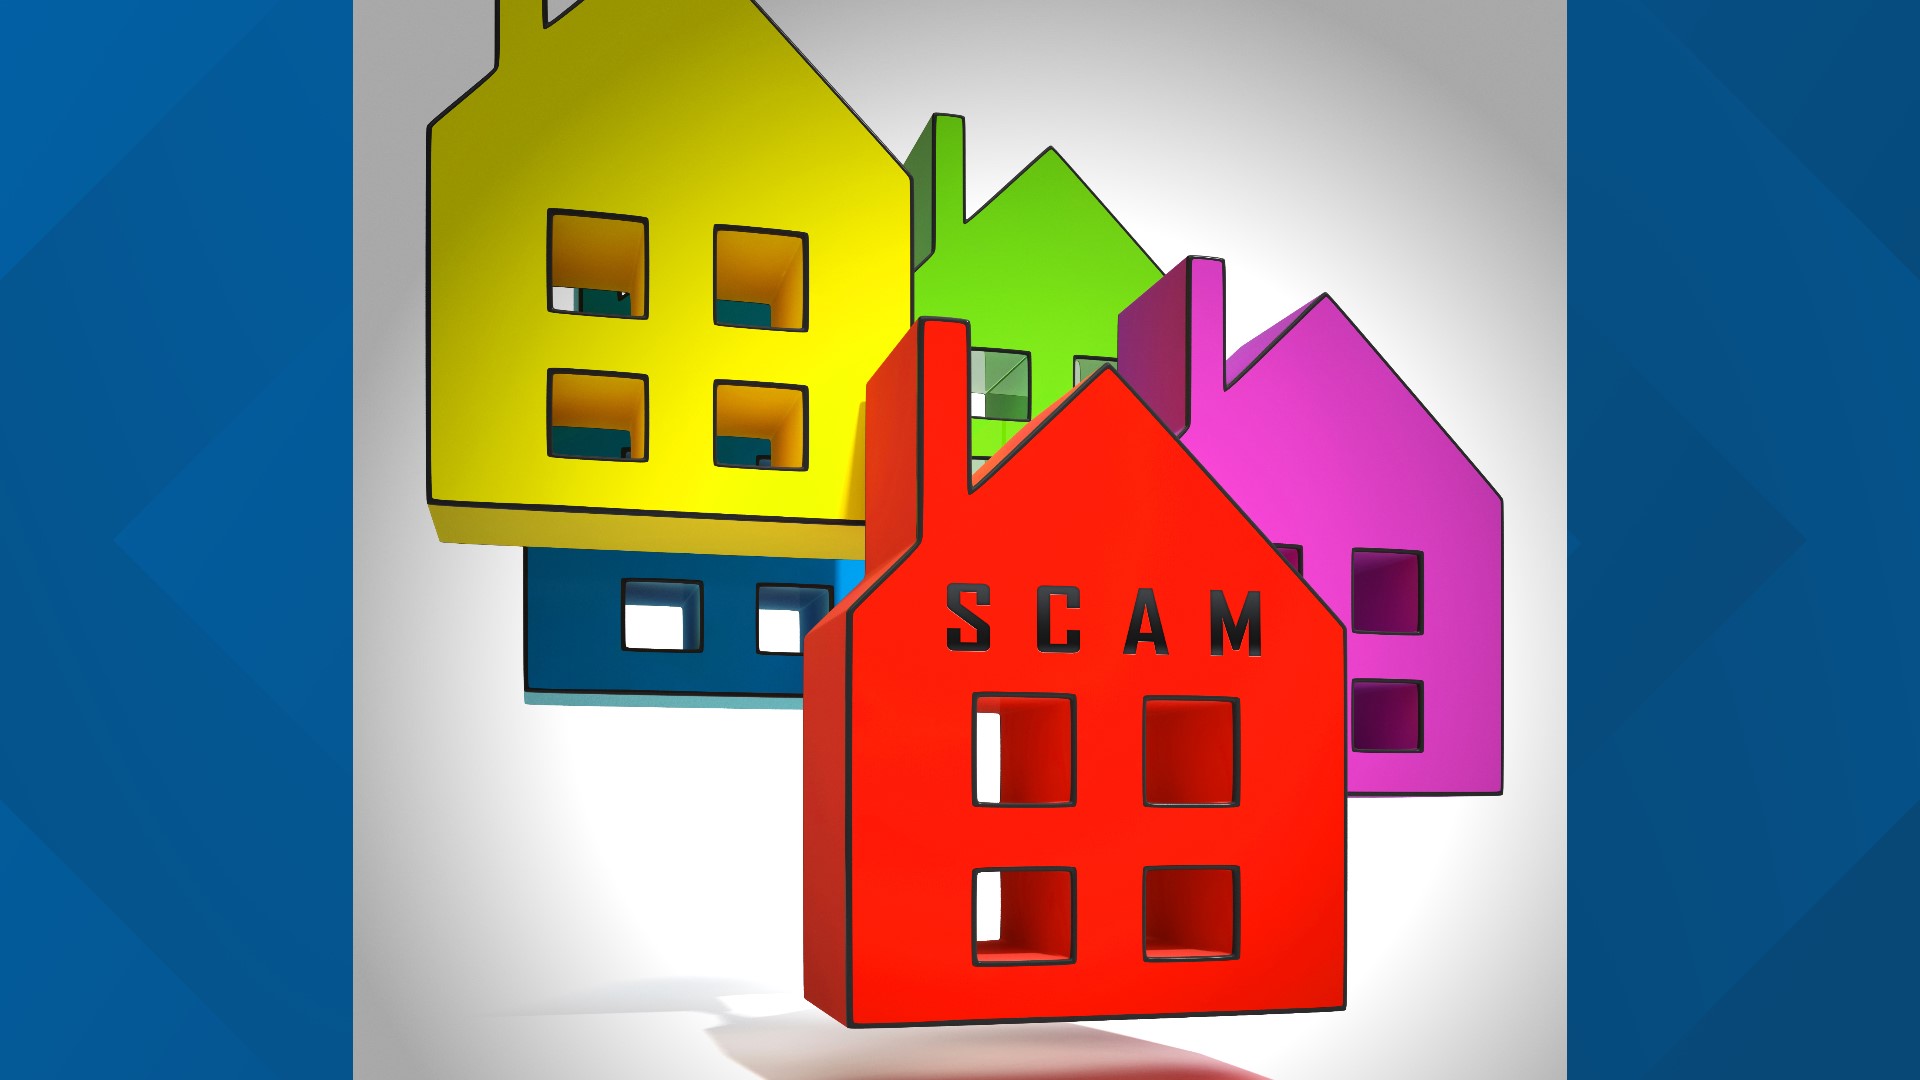 Before hiring a contractor, make sure you do your research and pay attention to red flags because this is the time when scammers are cashing in.